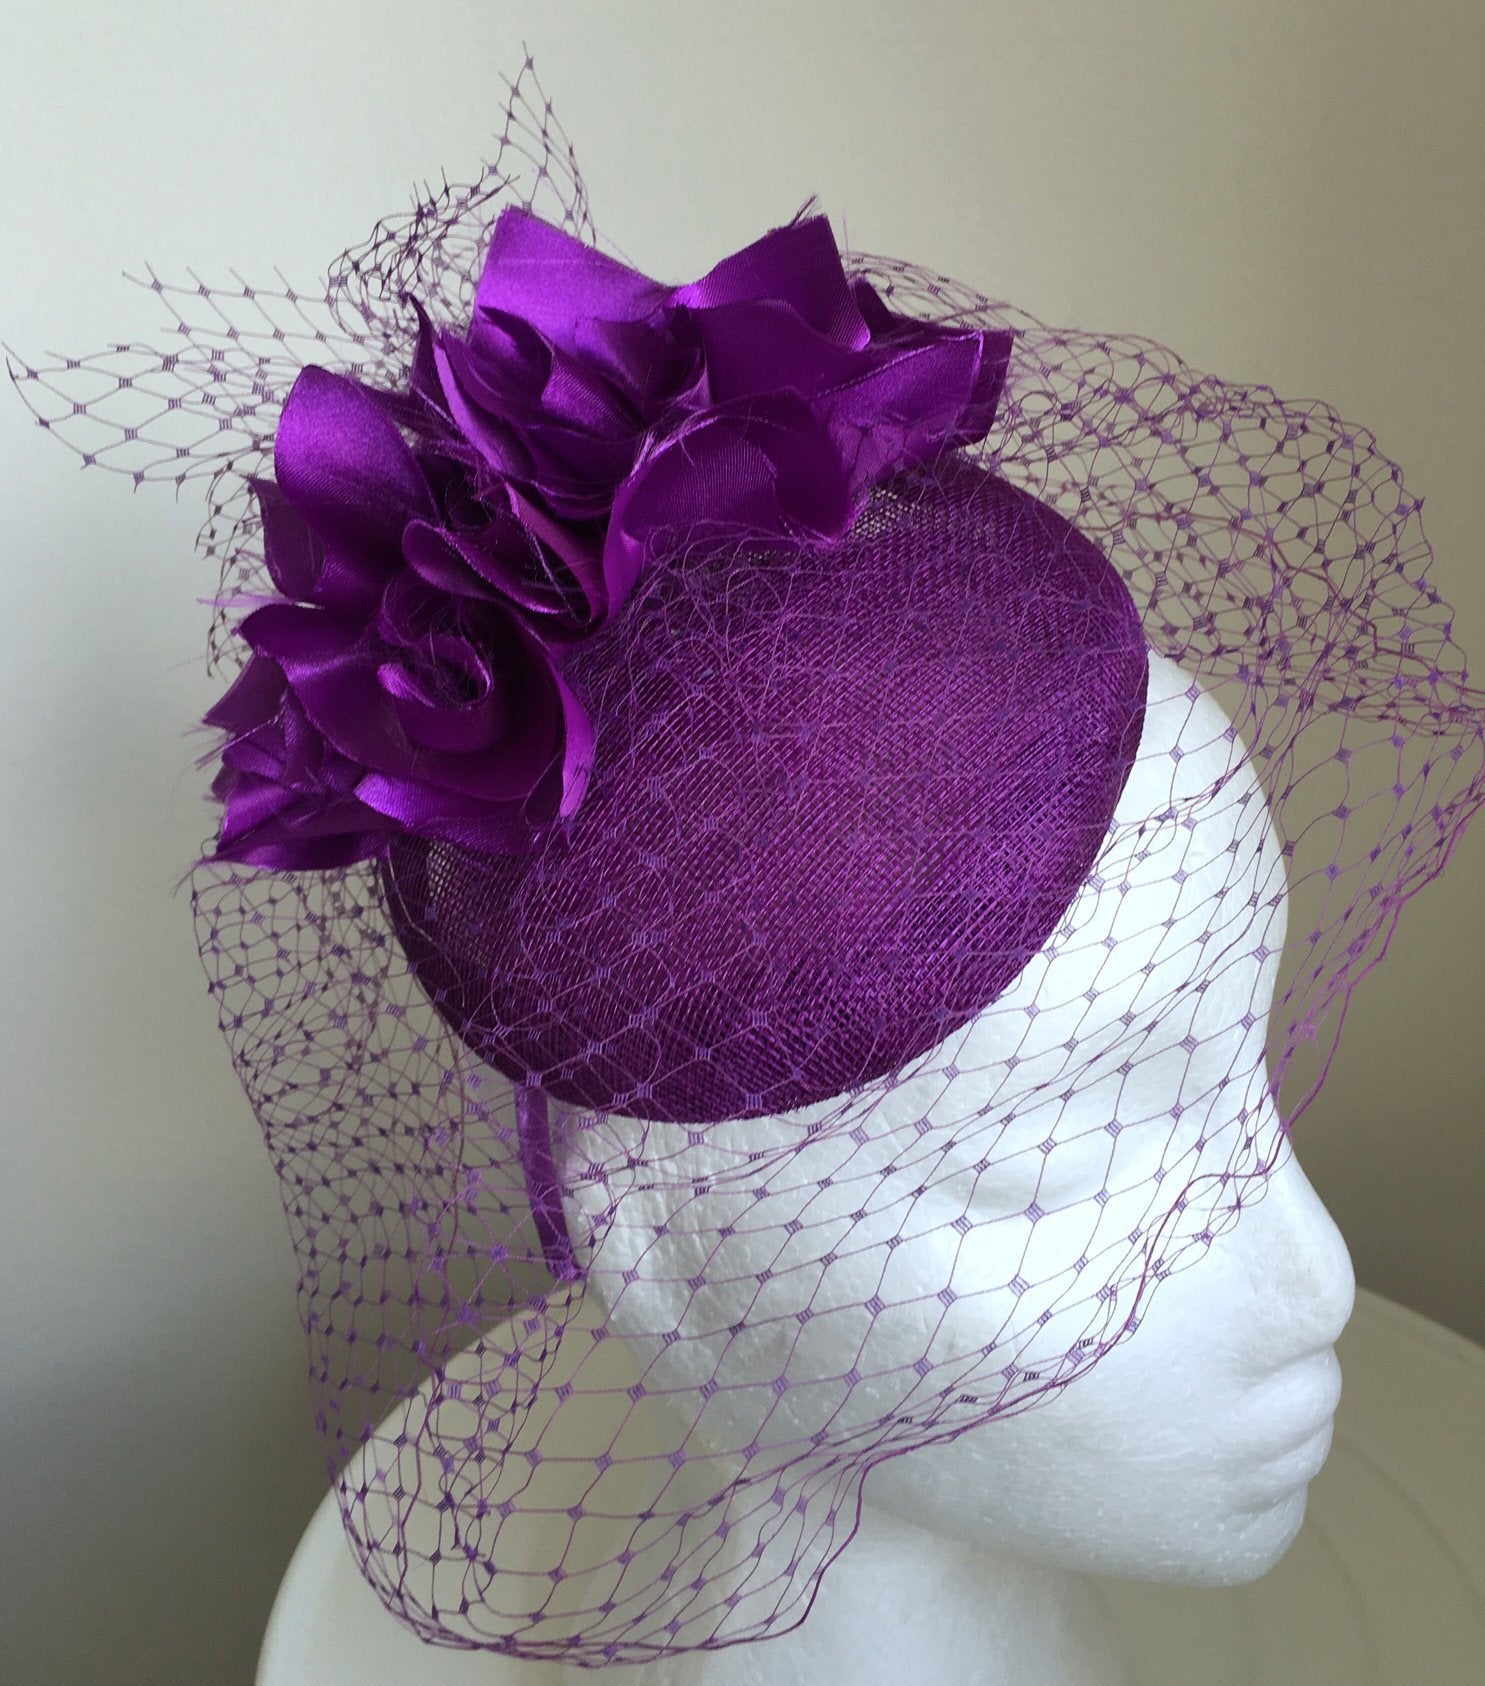 FIFI Purple Fascinator with Netting, Kentucky Derby Hat, Spring Racing Fashion 2023, Royal Wedding Hat, Ladies Tea-Party Hat with Headband